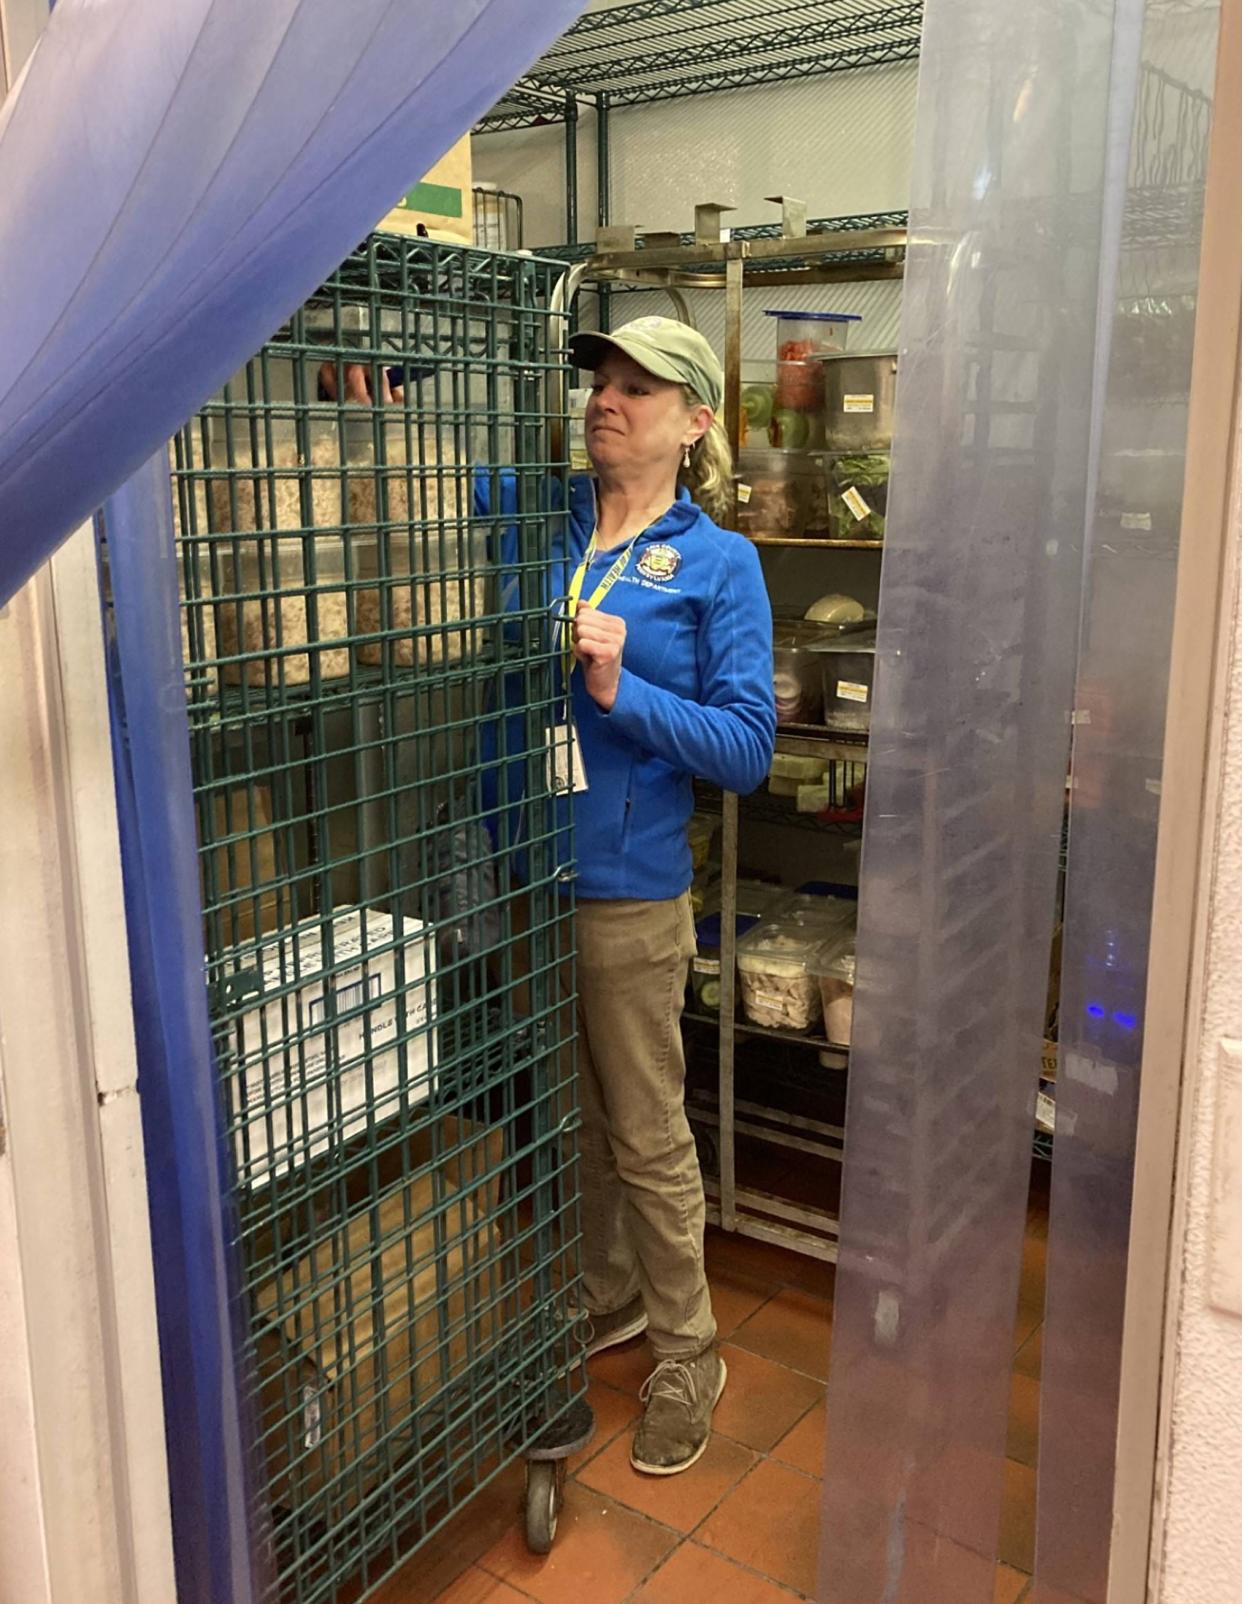 Lisa Susann, an environmental protection specialist with the Erie County Department of Health, checks the temperature of foods inside the walk-in cooler at Panera Bread, 2501 W. 12th St., on April 18.